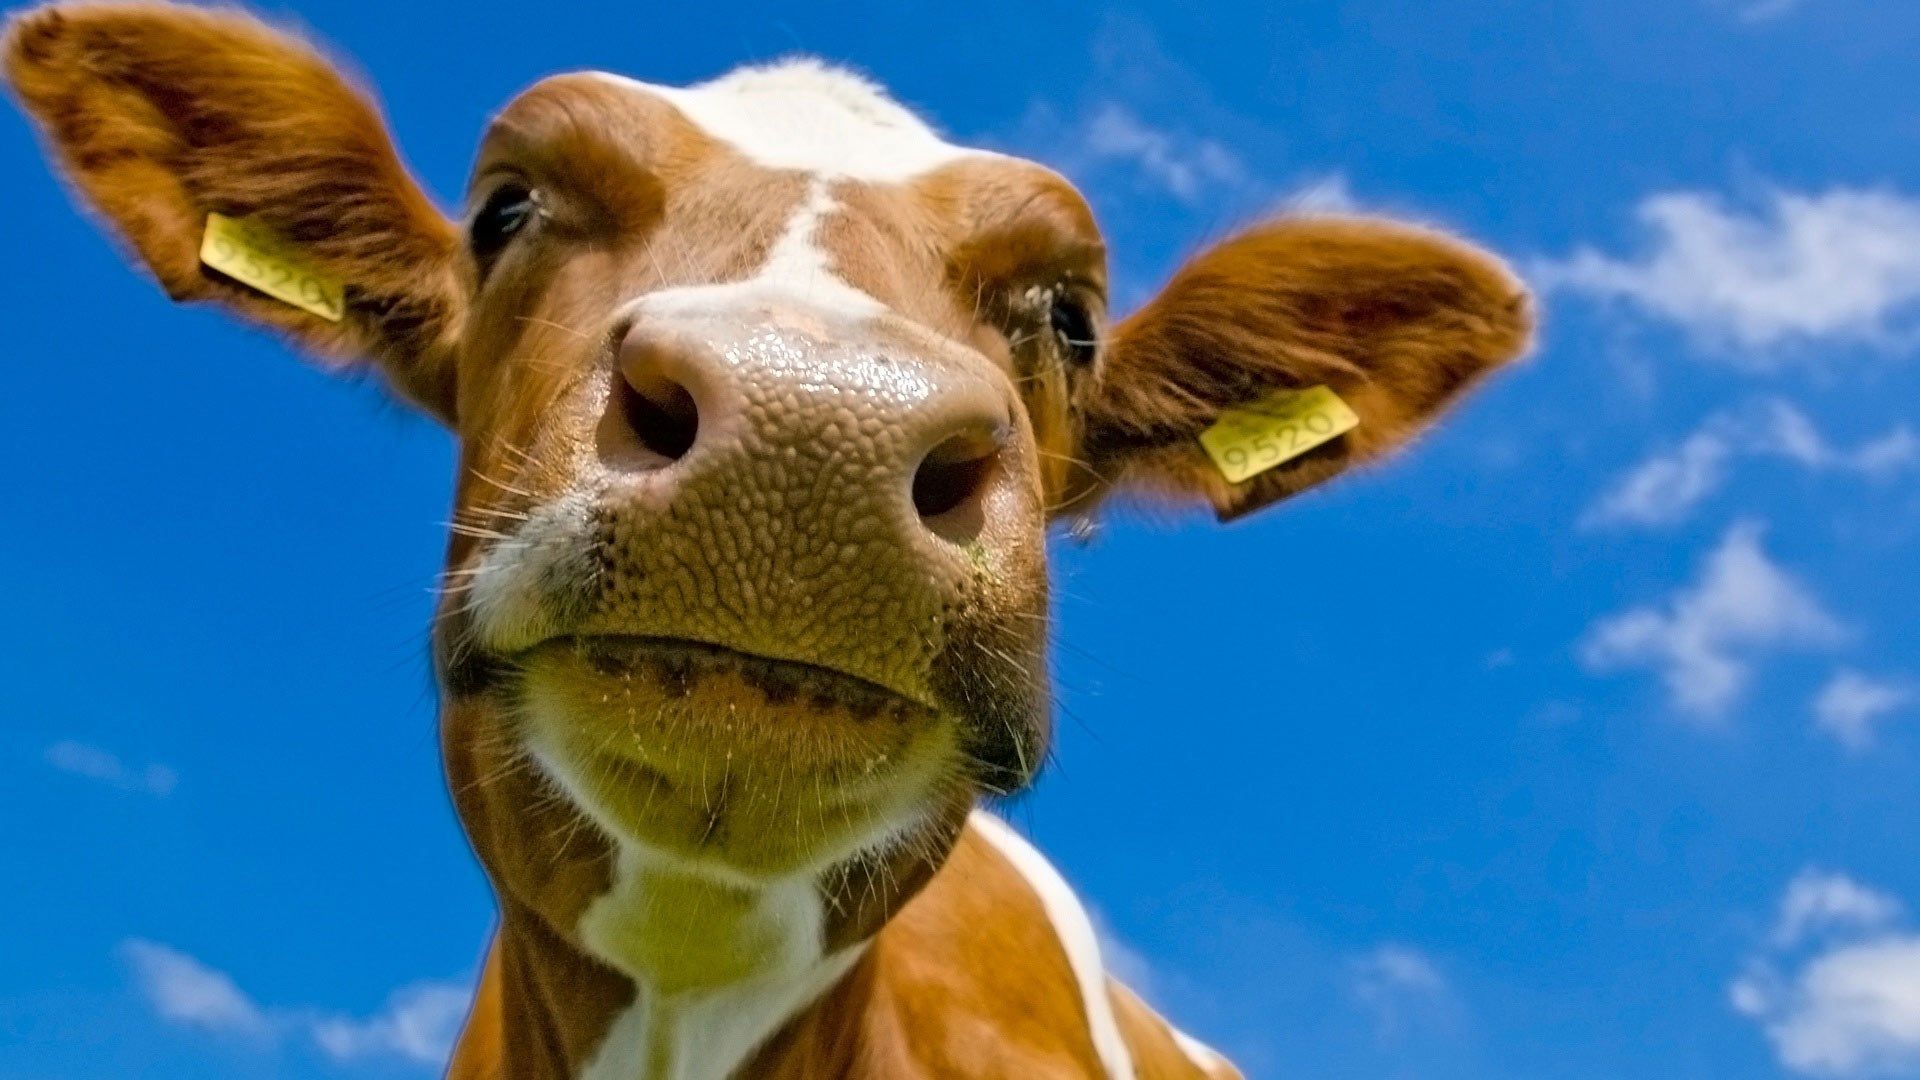 Cow Picture & Wallpaper